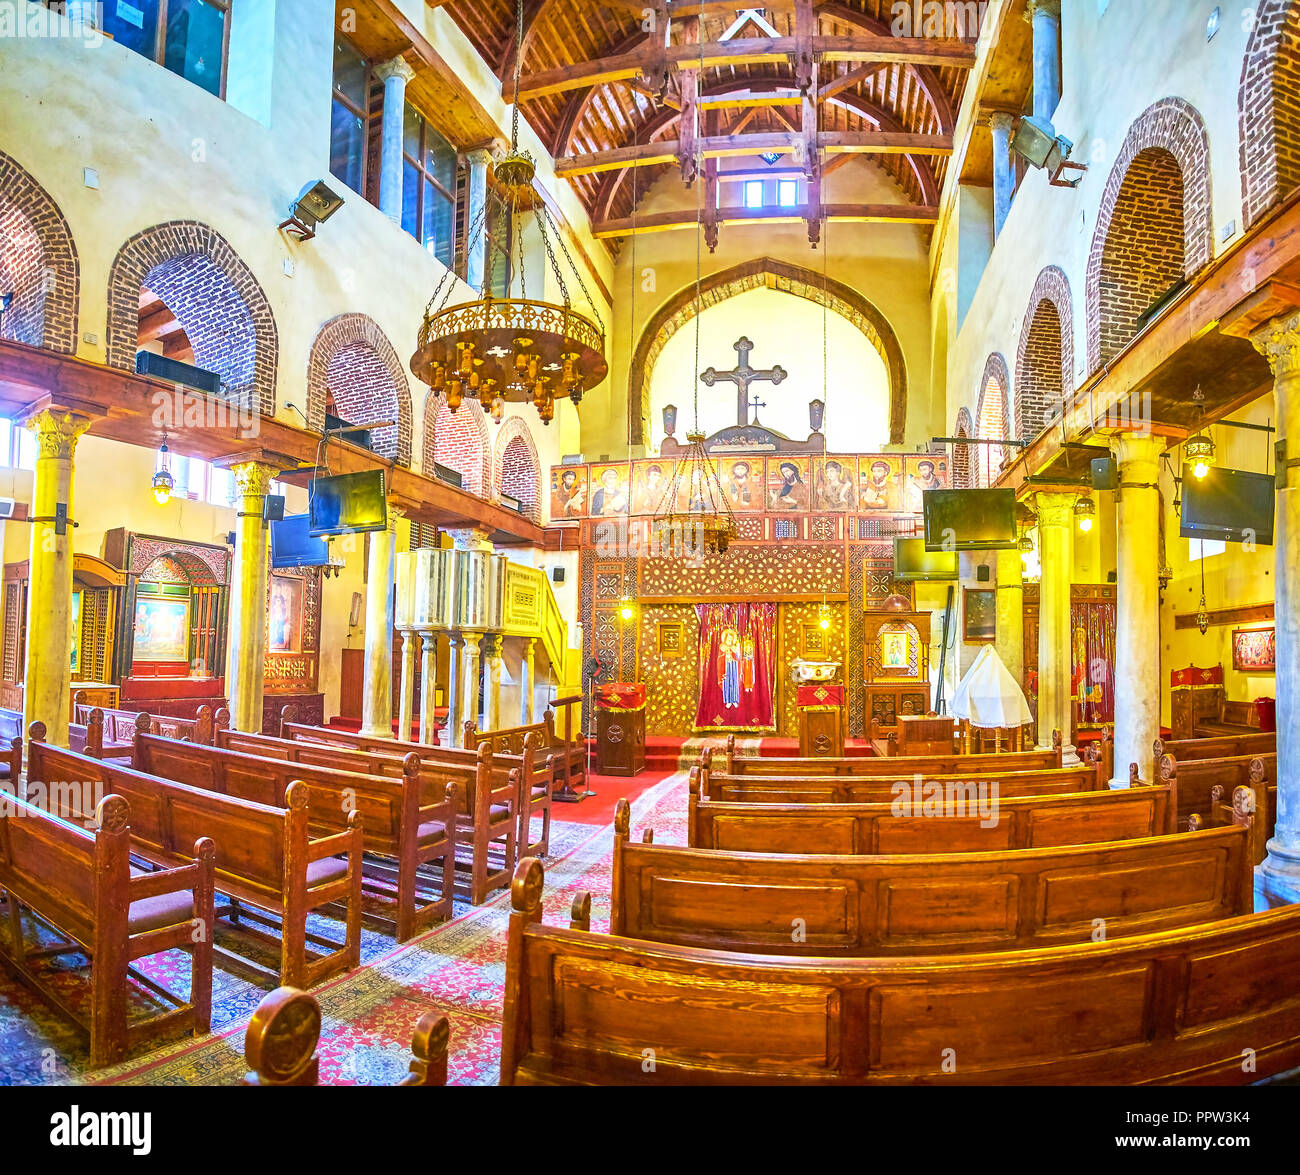 CAIRO, EGYPT - DECEMBER 23, 2017: The interior of Abu Serga (St Sergius and Bacchus) Church is a fine example of Coptic style churches in Cairo, on De Stock Photo